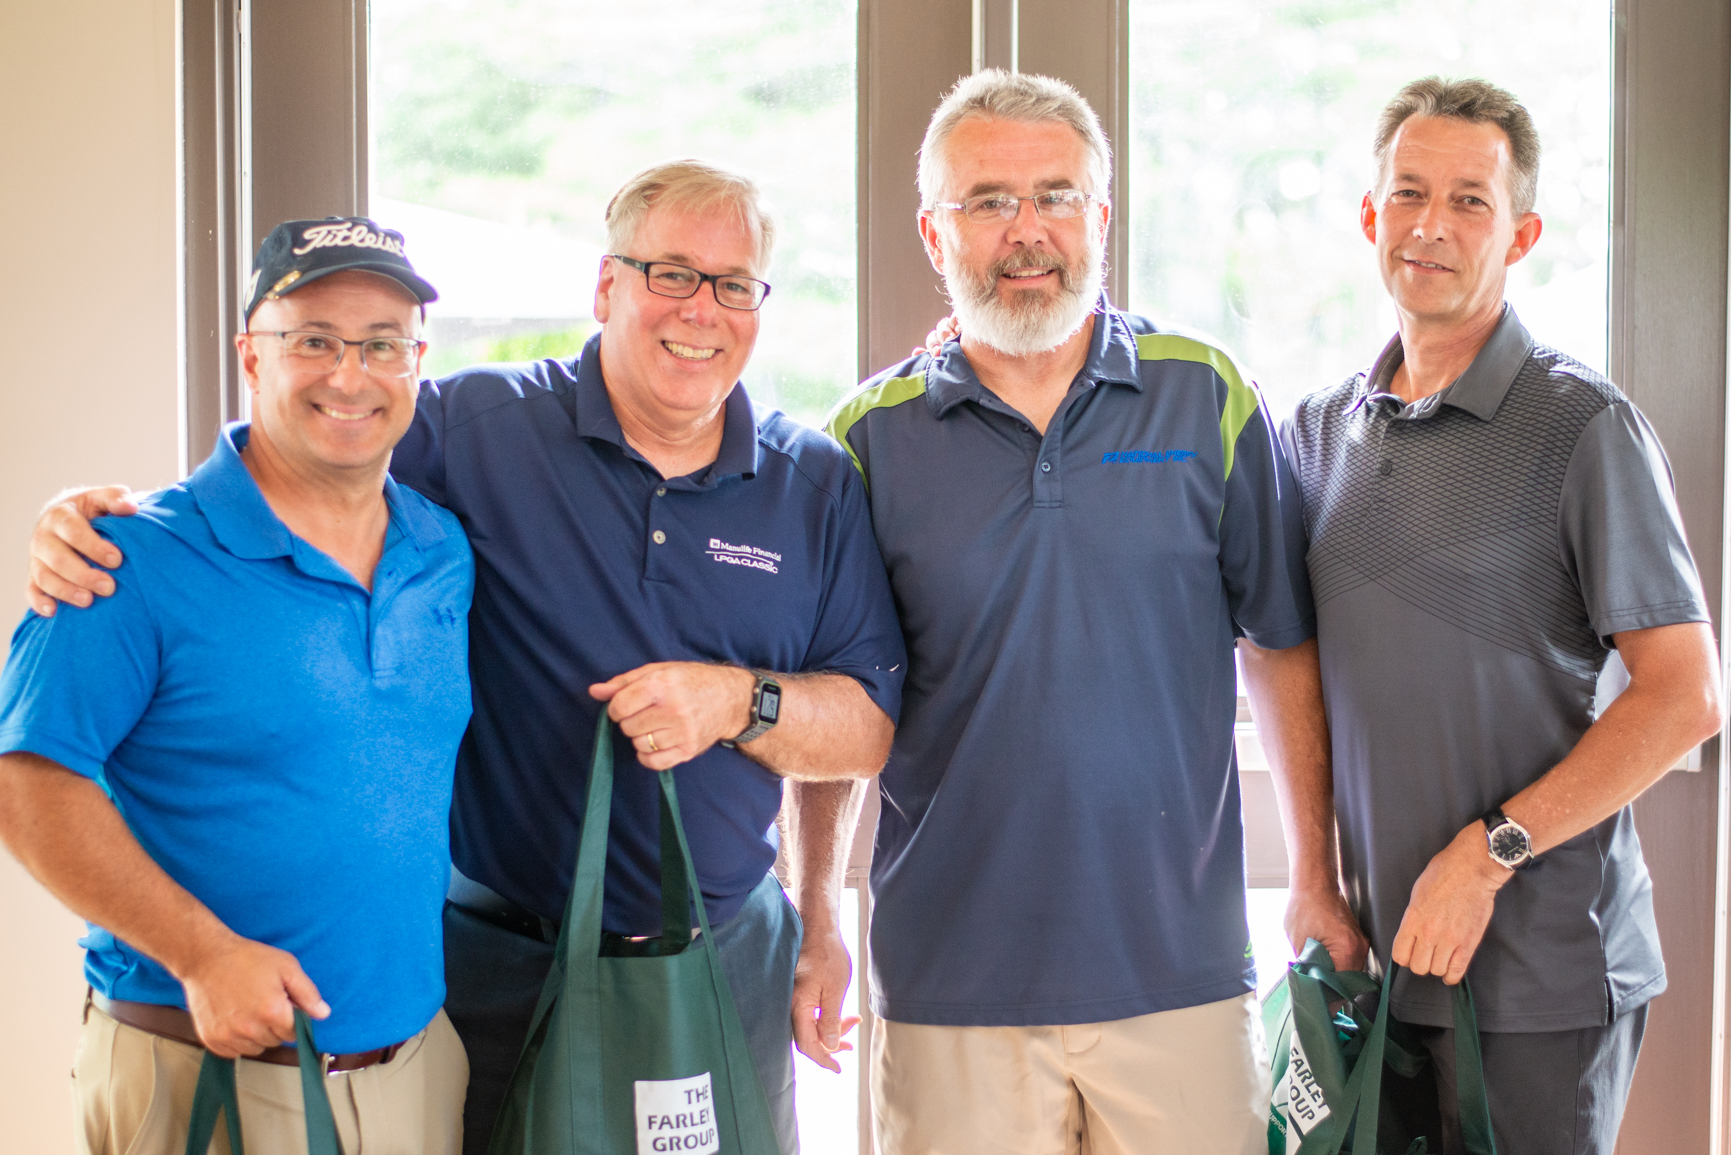 cliff arcand, ian clarke, and team winning lowest net at Norm Jary Golf Tournament